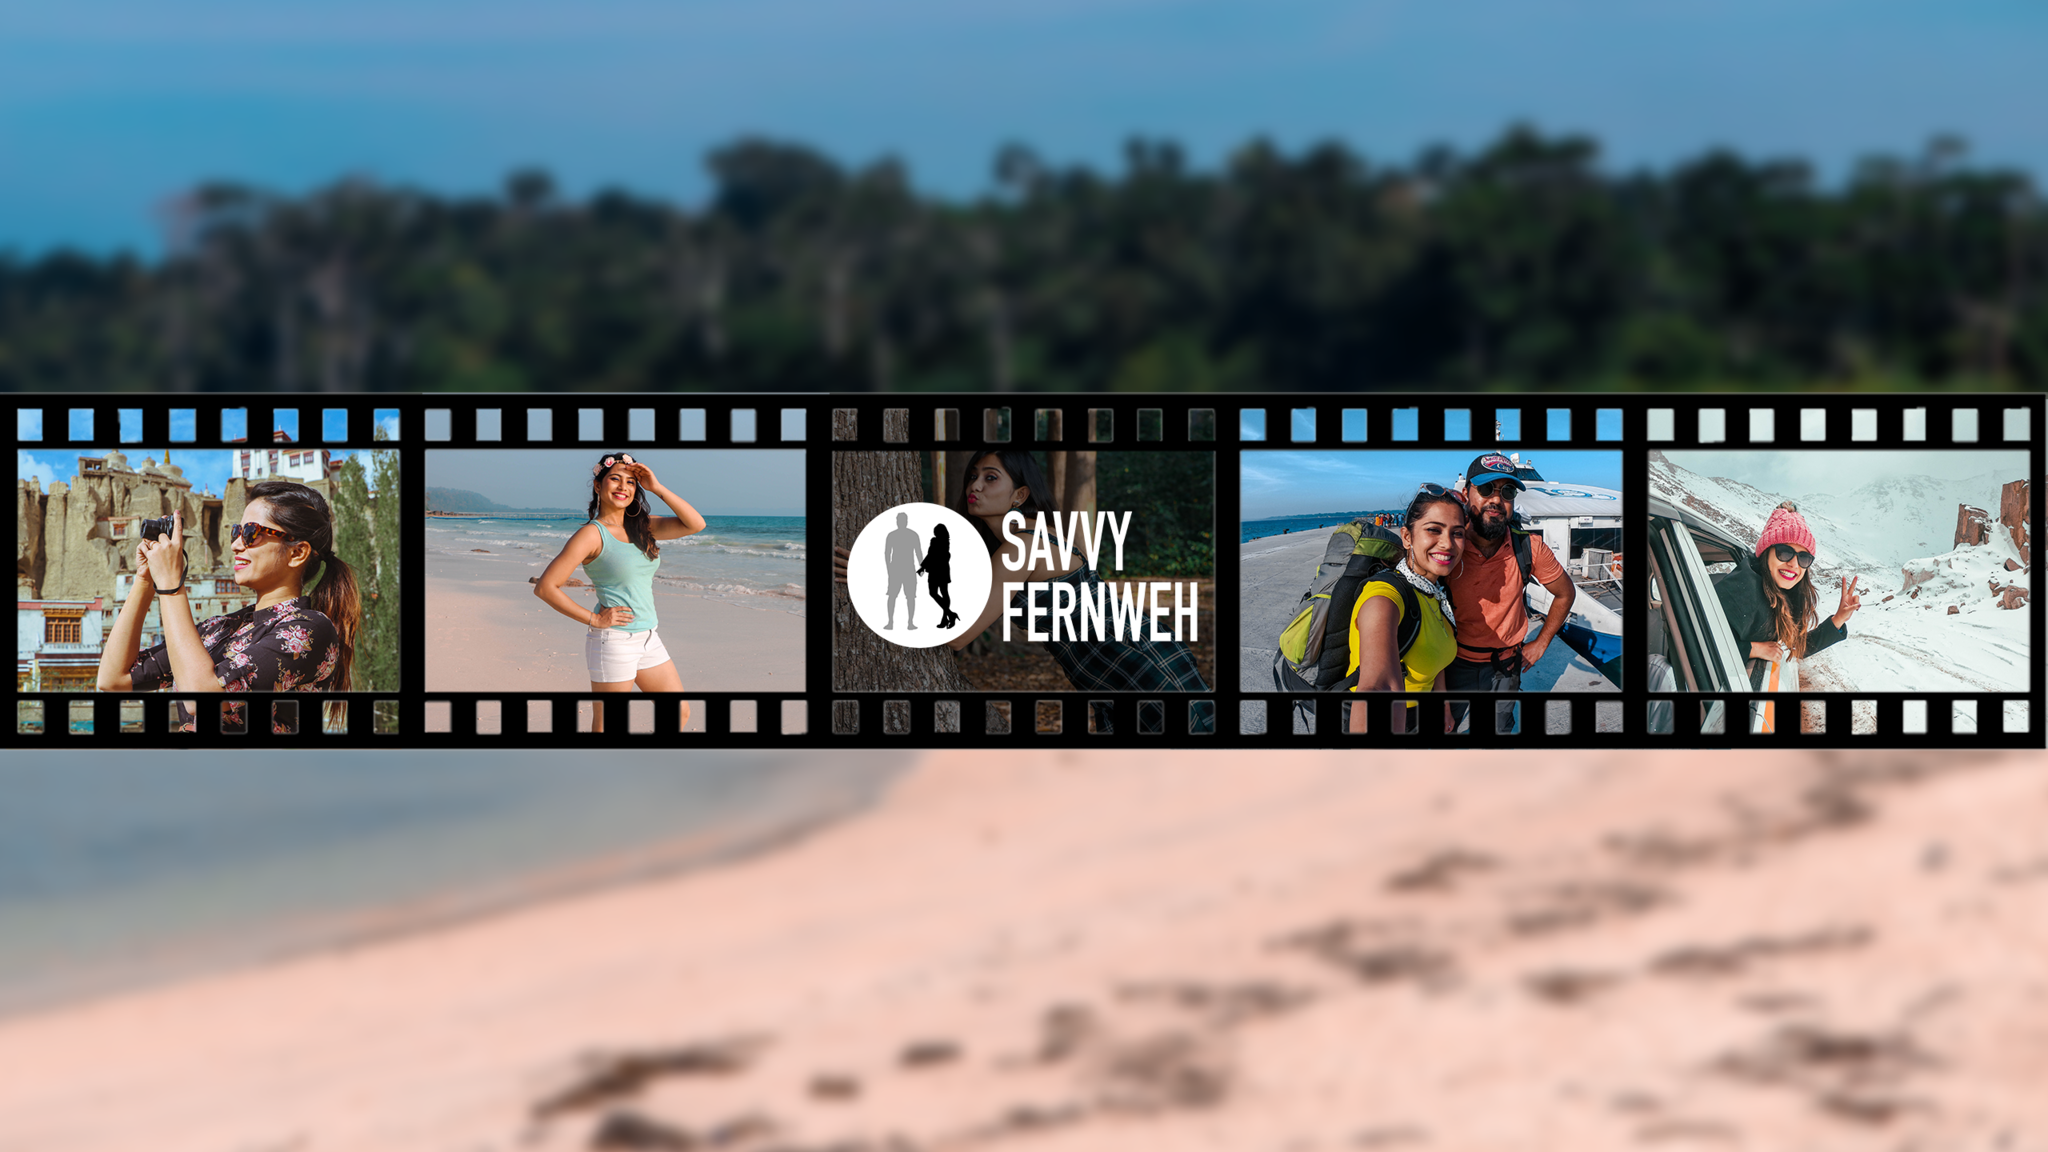 Cover Image of Savvy Fernweh